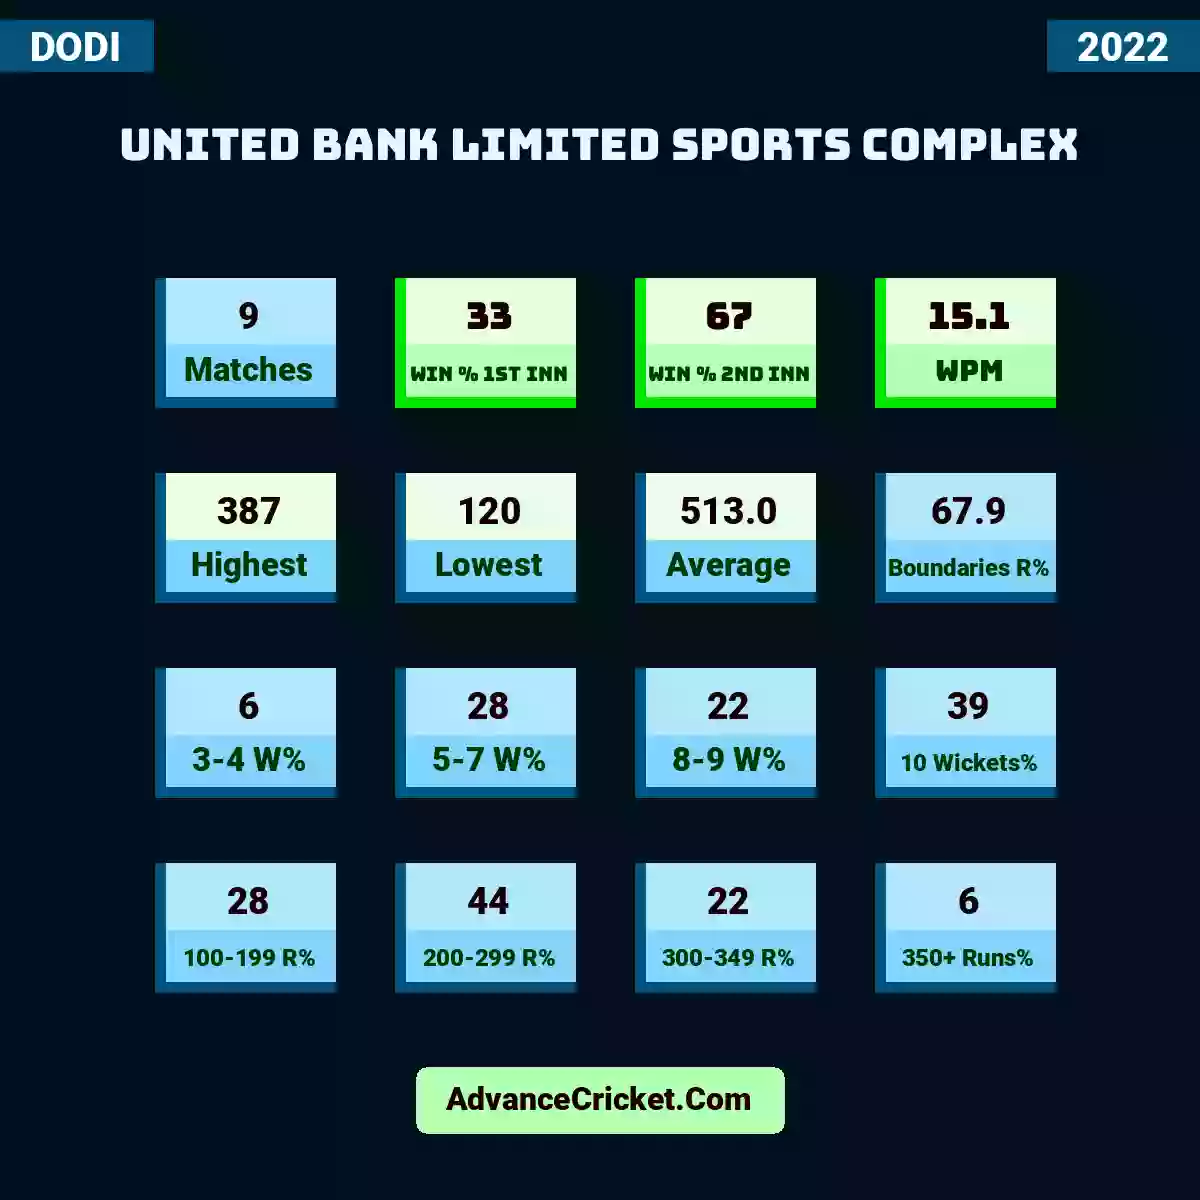 Image showing United Bank Limited Sports Complex with Matches: 9, Win % 1st Inn: 33, Win % 2nd Inn: 67, WPM: 15.1, Highest: 387, Lowest: 120, Average: 513.0, Boundaries R%: 67.9, 3-4 W%: 6, 5-7 W%: 28, 8-9 W%: 22, 10 Wickets%: 39, 100-199 R%: 28, 200-299 R%: 44, 300-349 R%: 22, 350+ Runs%: 6.